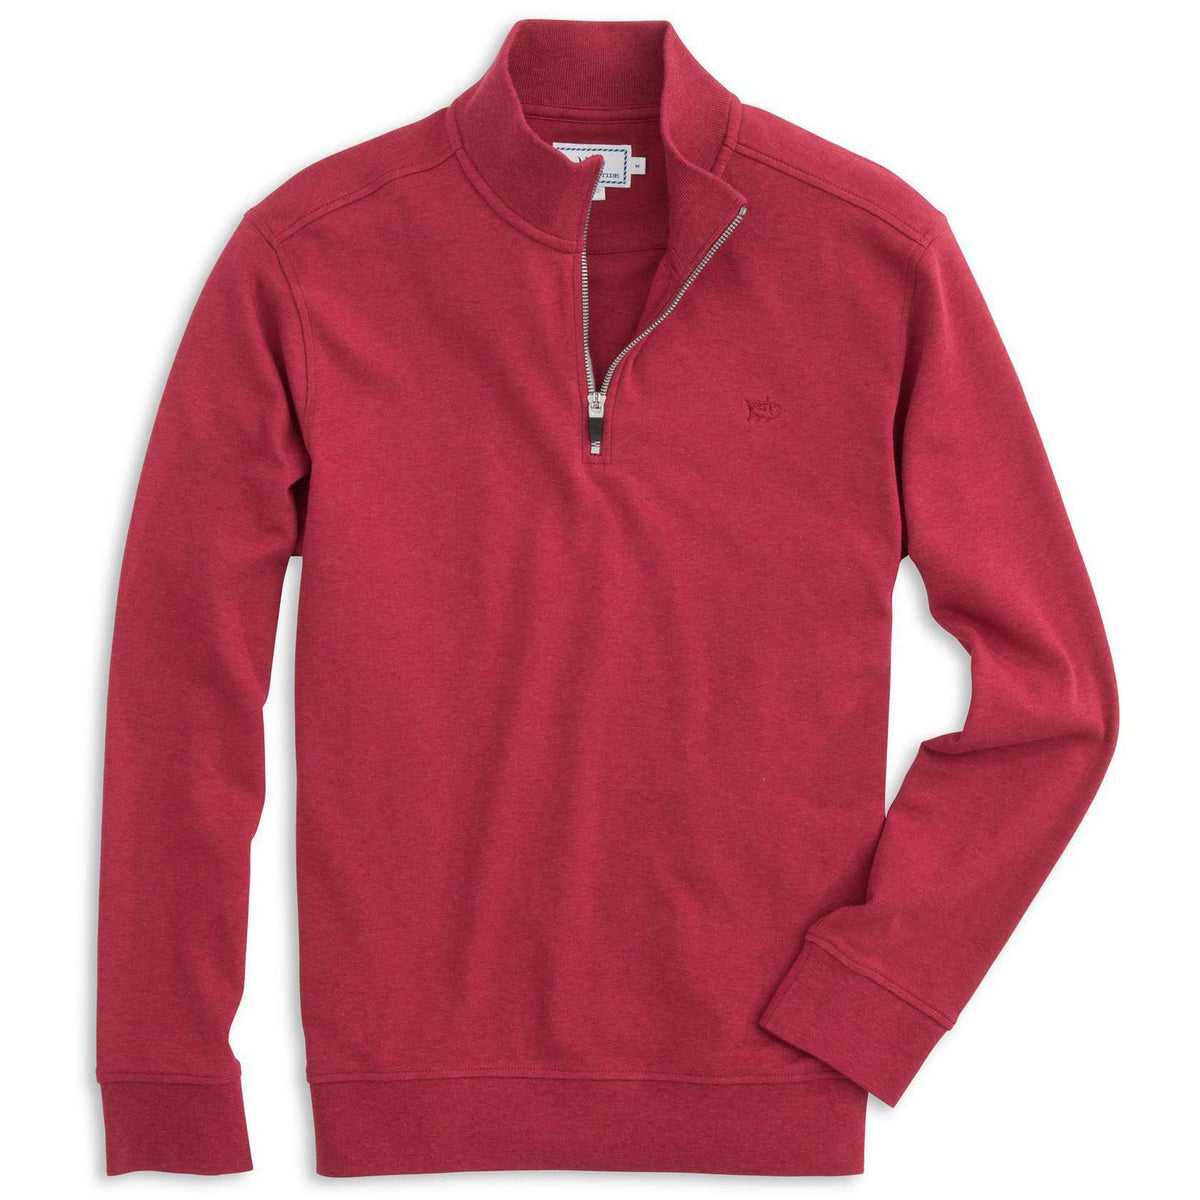 Newport Heather Lightweight 1/4 Zip Pullover in Sangria Red by Southern Tide - Country Club Prep